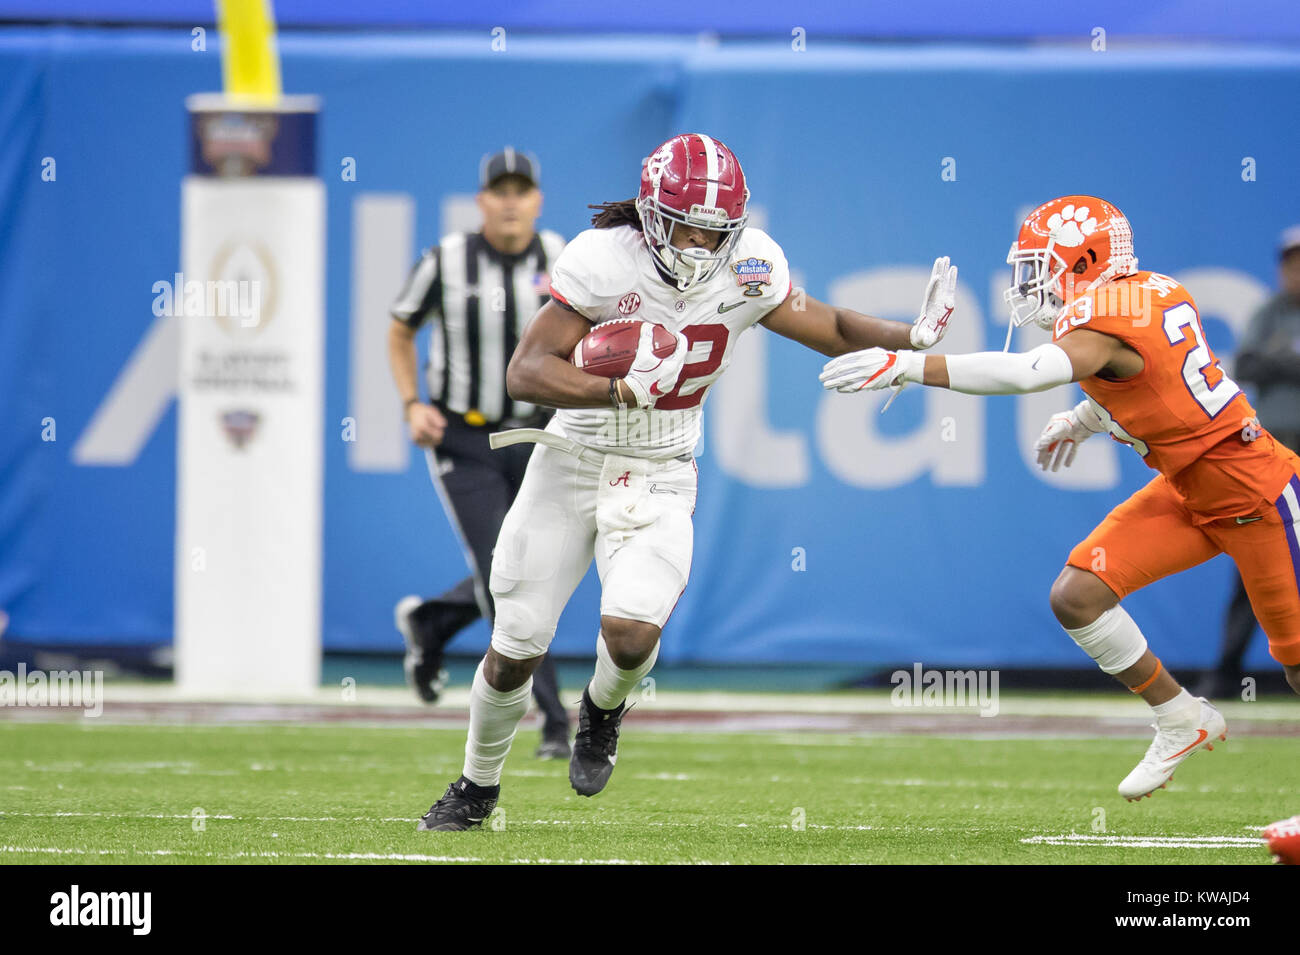 New Orleans, LA, USA. 1st Jan, 2018. Alabama RB Najee Harris #22 about to stiff arm a Clemson defender during the Allstate Sugar Bowl football game between the Clemson Tigers and the Alabama Crimson Tide at the Mercedes-Benz Supedome in New Orleans, LA. Kyle Okita/CSM/Alamy Live News Stock Photo